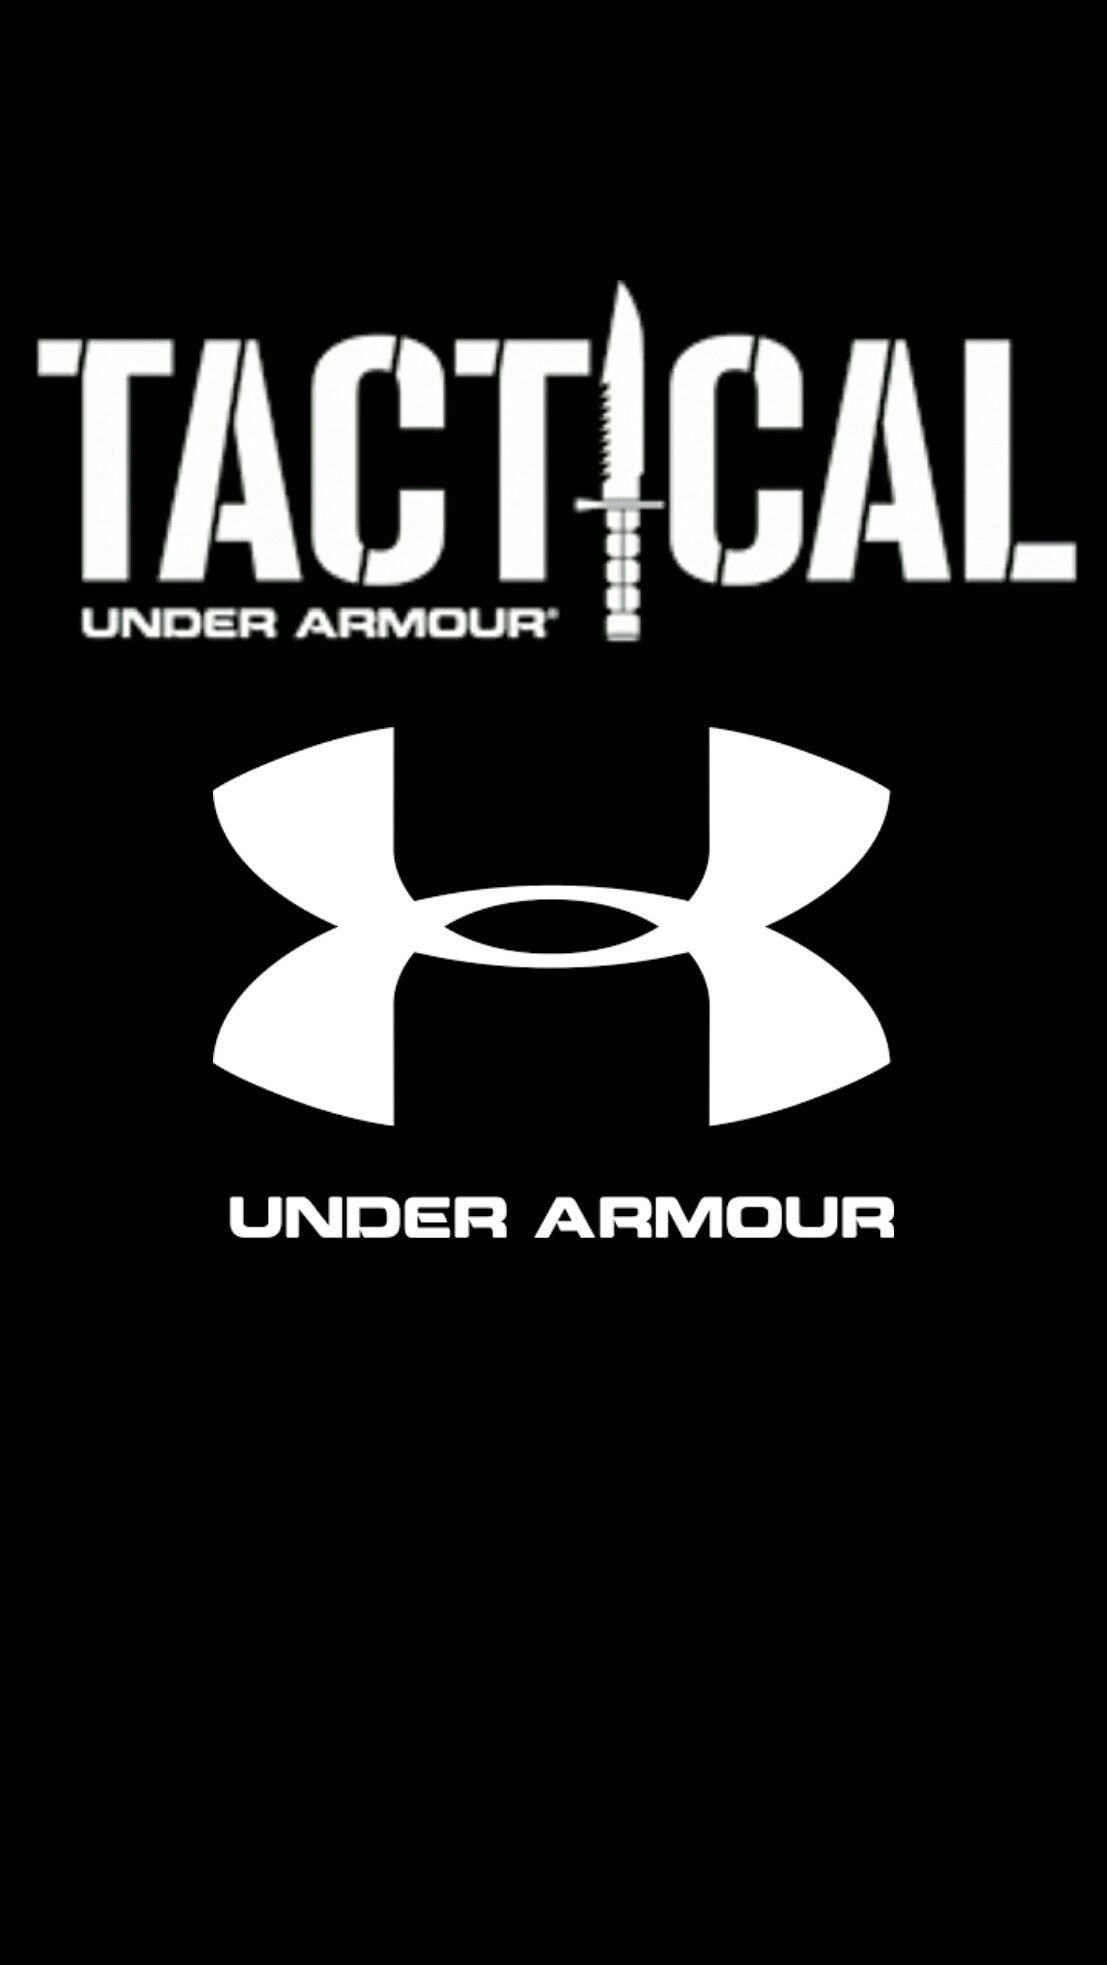 Under armour iphone wallpaper. Under armour wallpaper, Under armour, Under armour logo